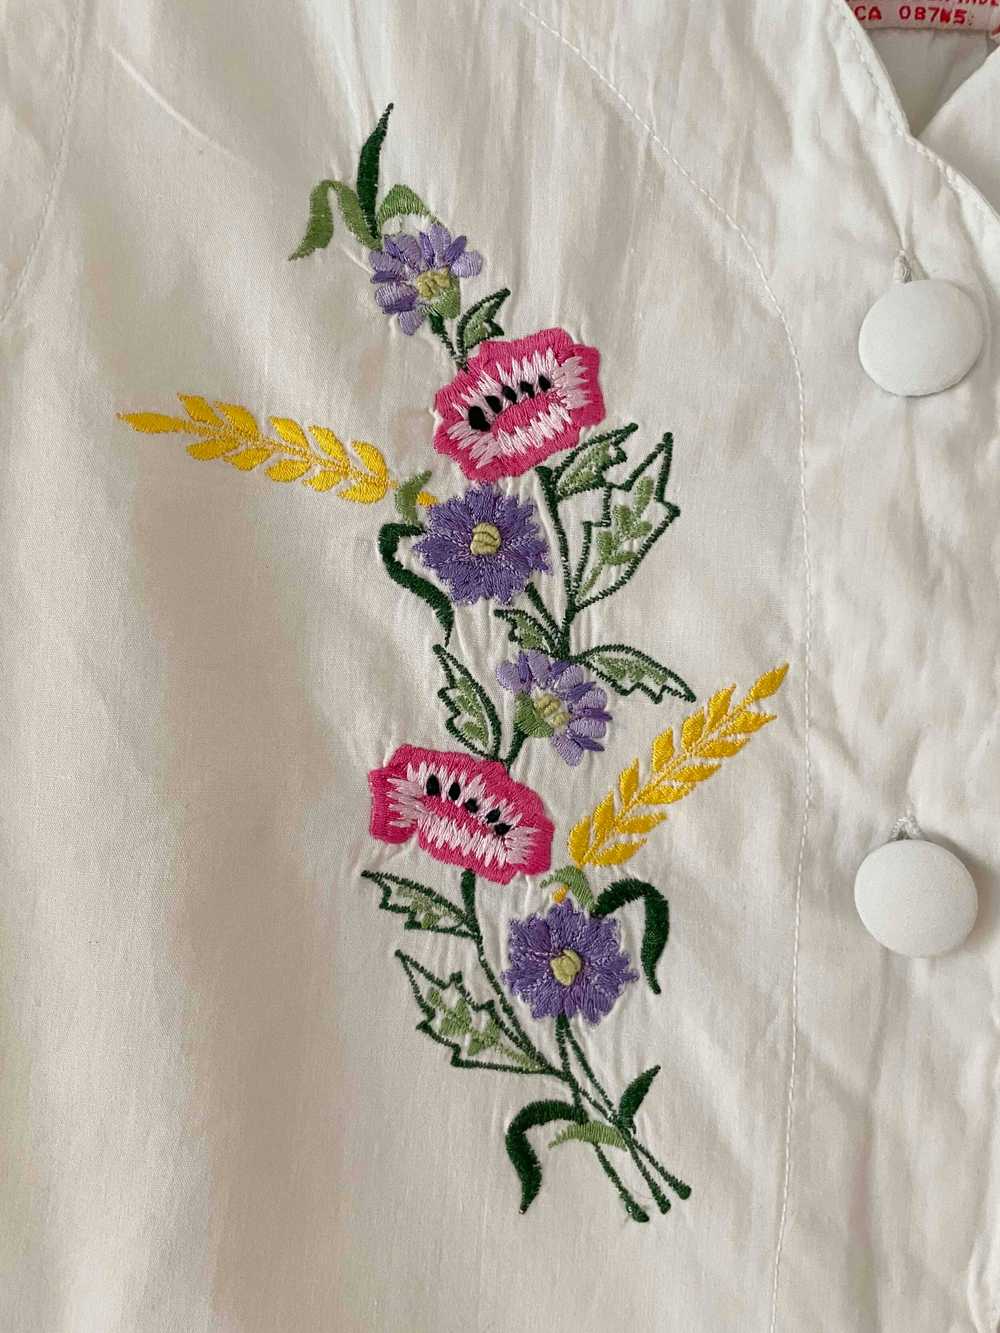 Cotton top - Top embroidered flowers Tank top / C… - image 4